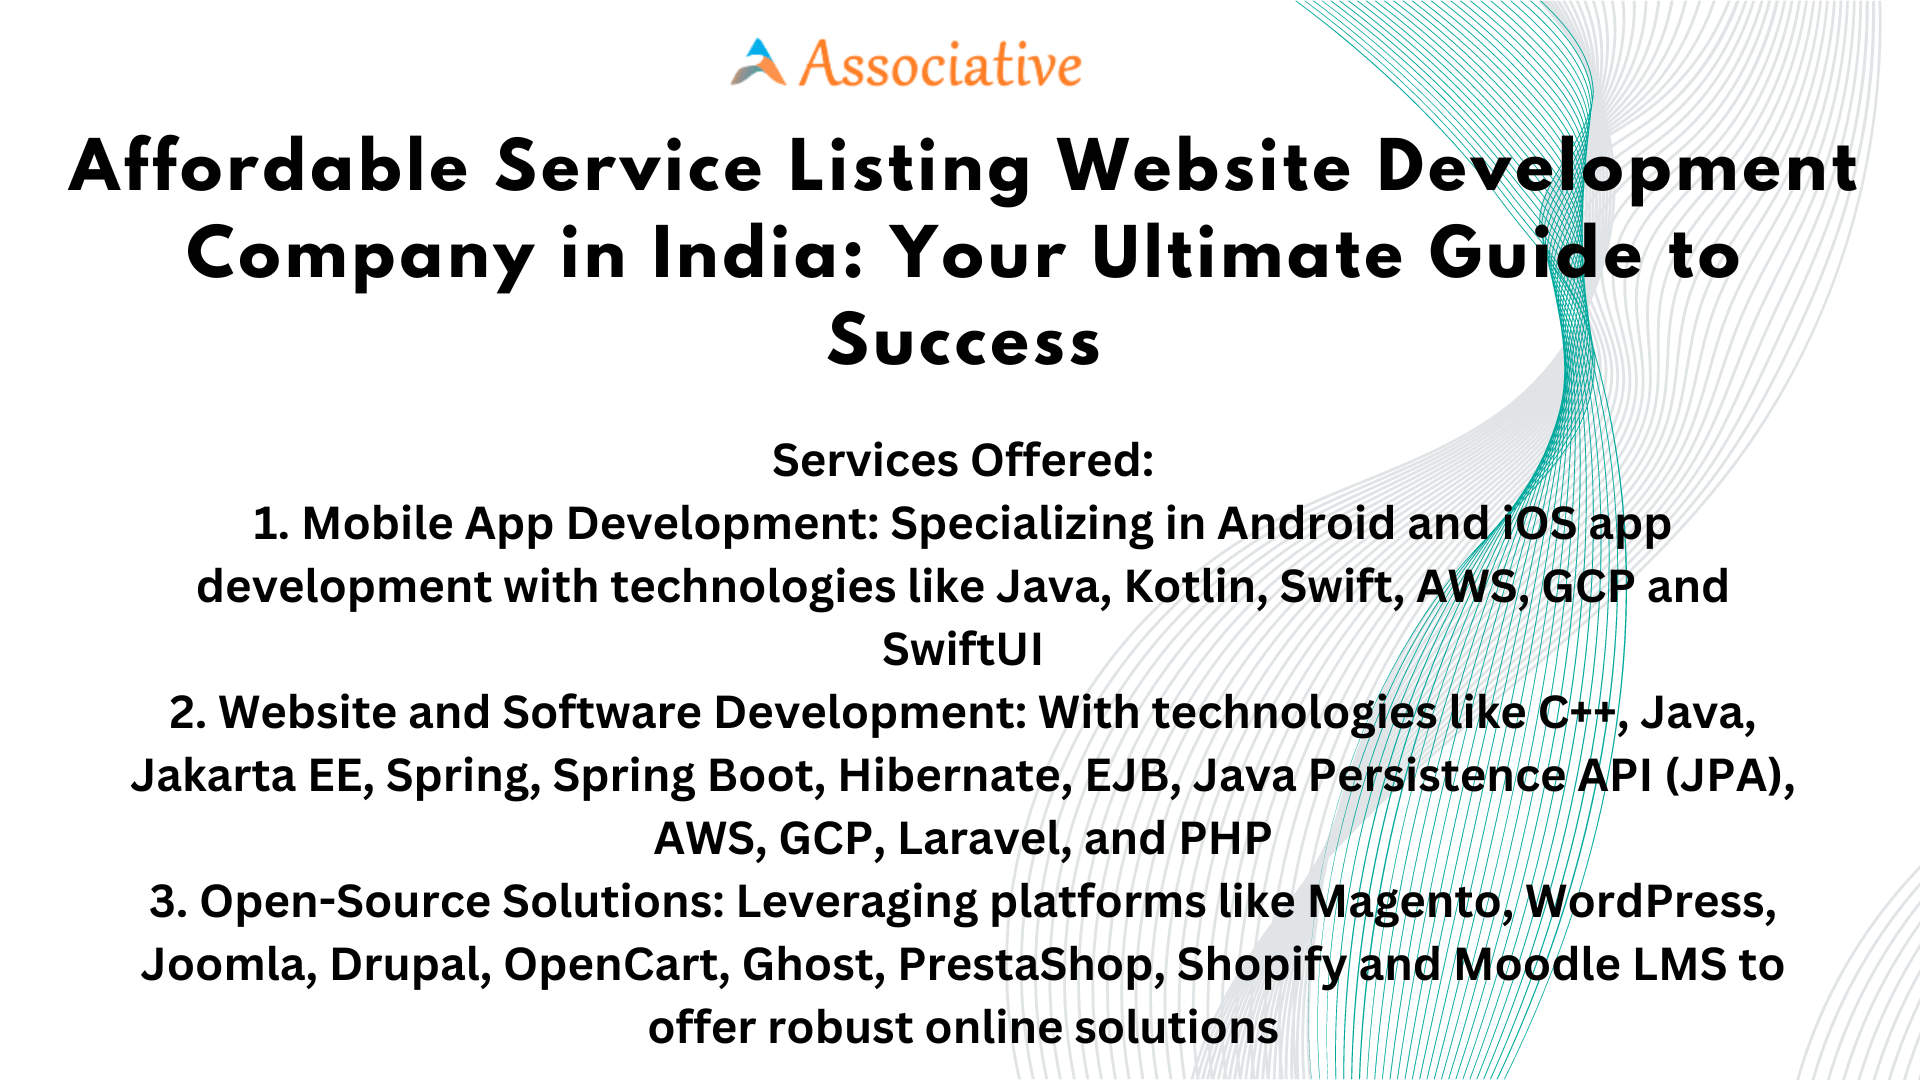 Affordable Service Listing Website Development Company in India Your Ultimate Guide to Success